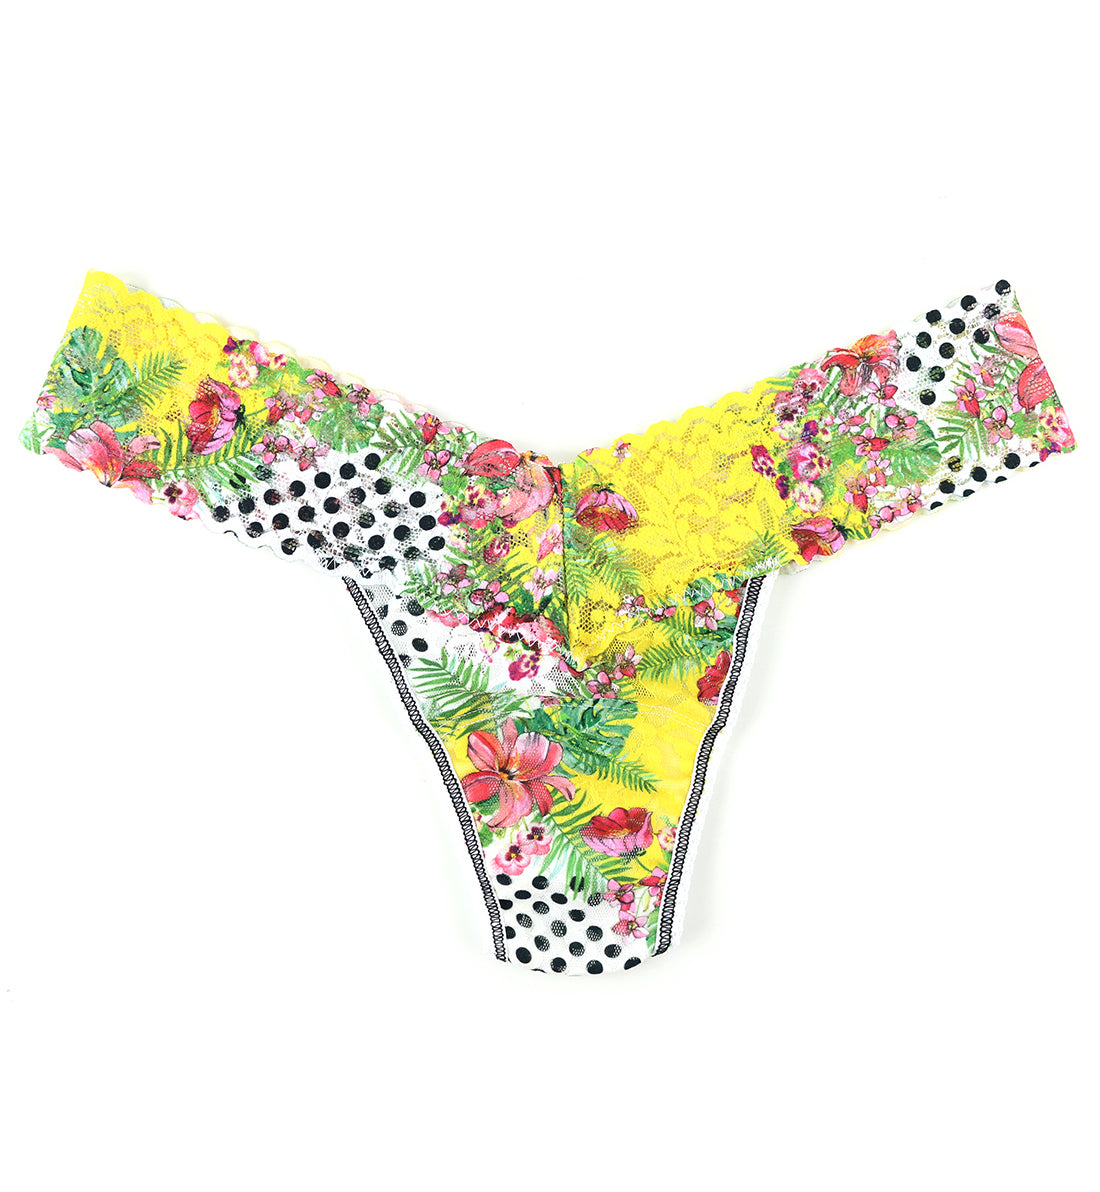 Hanky Panky Decades Teens Floral Mashup Low Rise Thong - Teens Floral Mashup,One Size